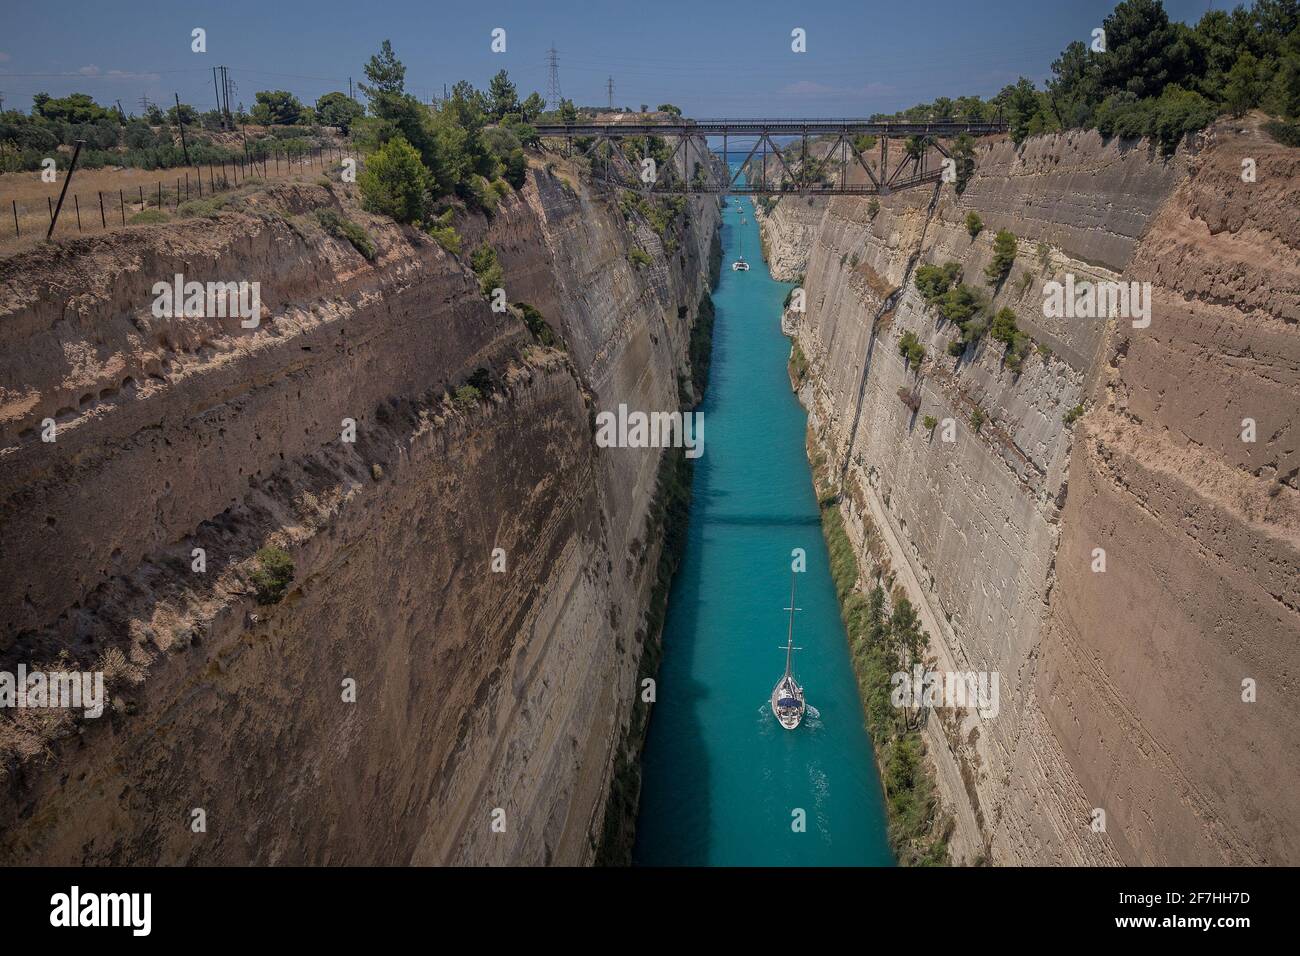 Corinth or corinthian canal in Greece. A narrow waterway that connects Ionic sea with Aegean sea. Narrow water passage carved in rock on a sunny day. Stock Photo